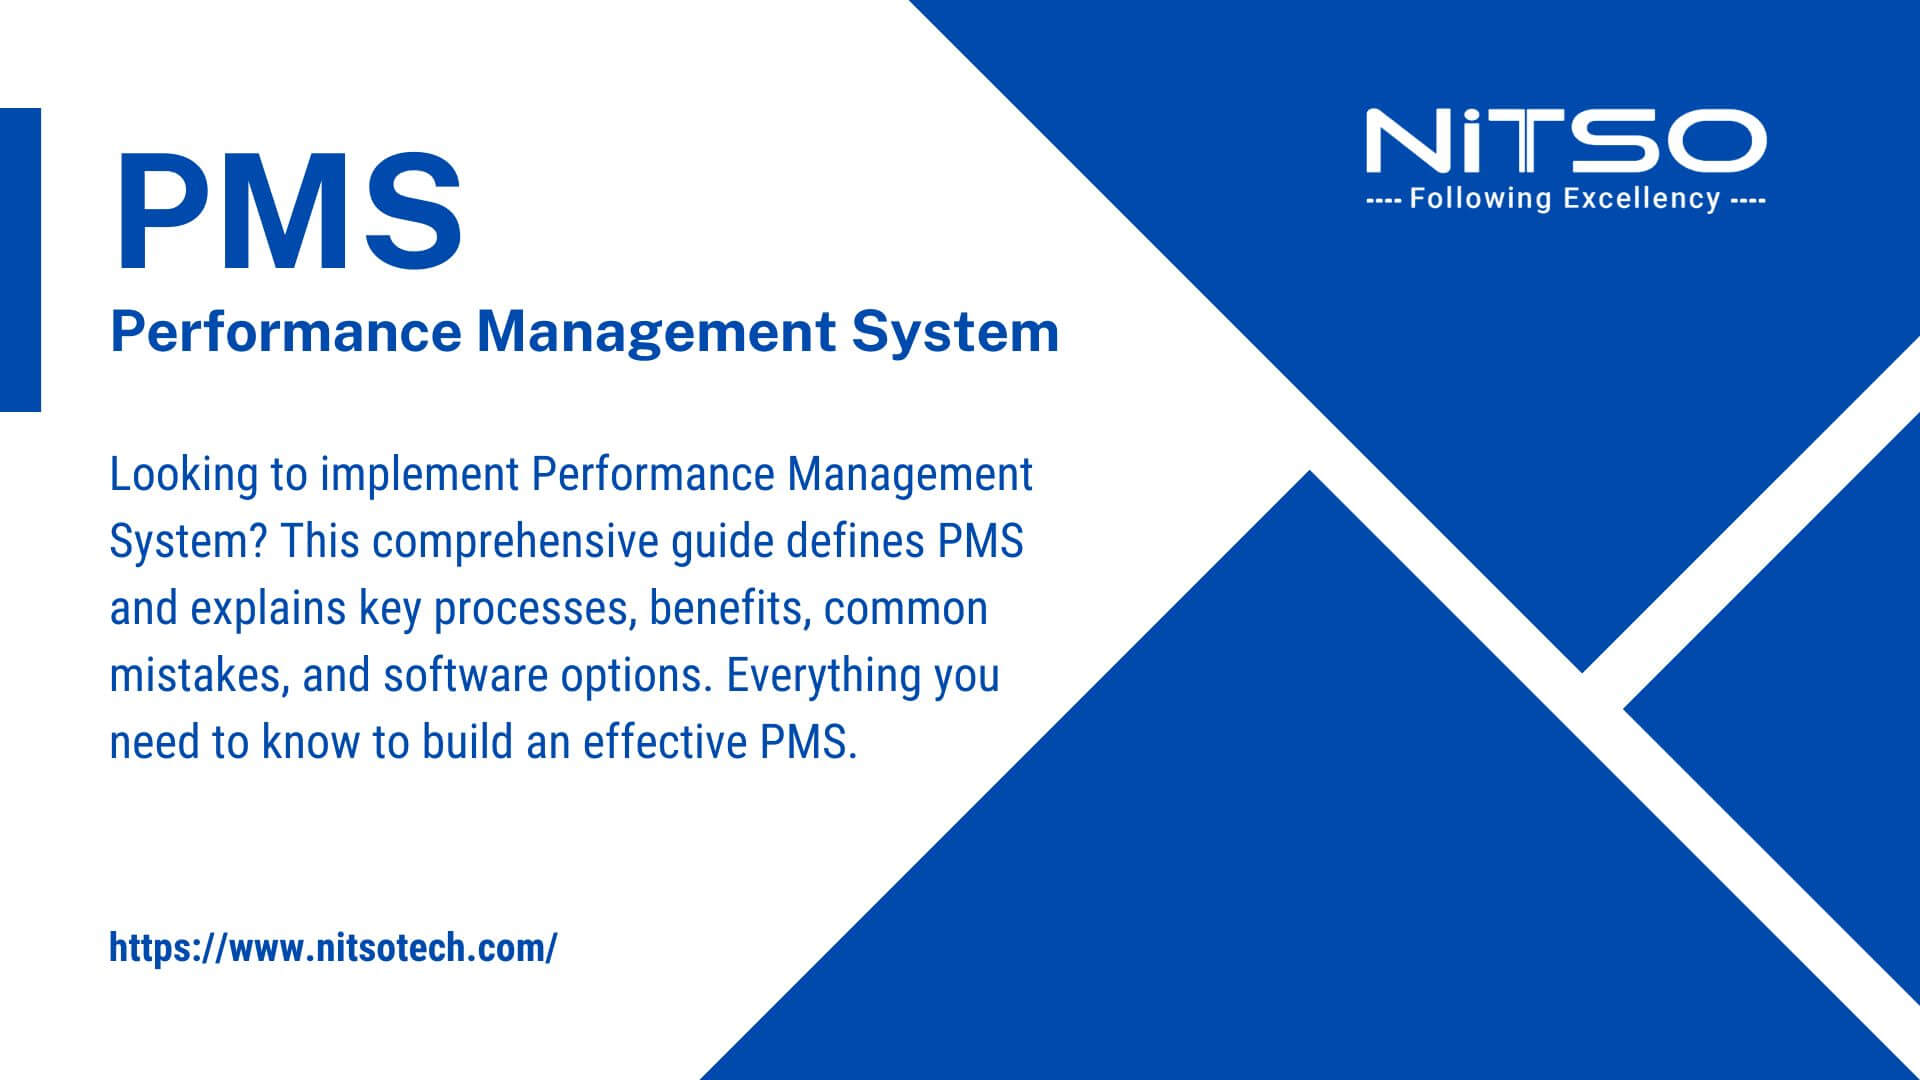 Performance Management Systems (PMS)